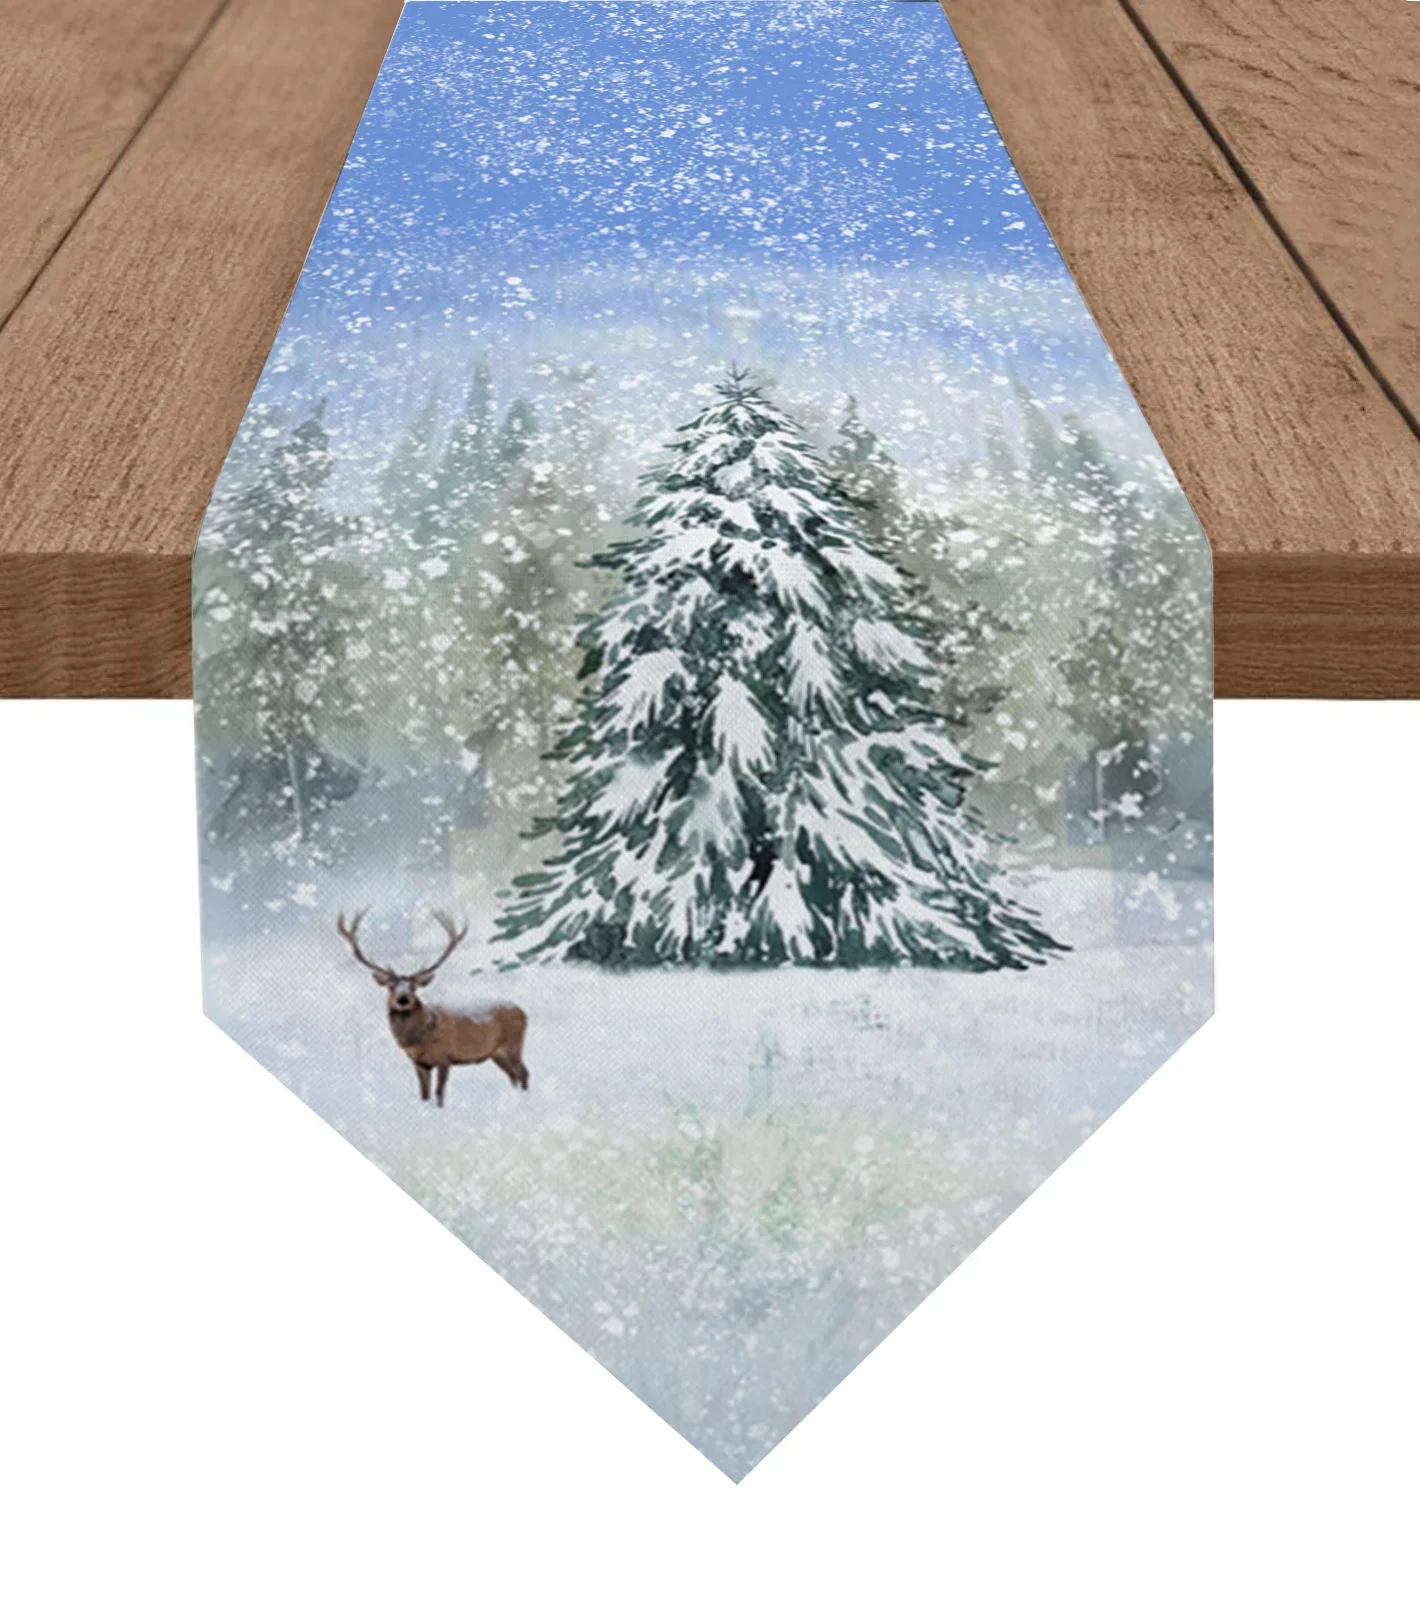 

Christmas Deer Snowflakes Table Runner Christmas Party Dining Table Runner Placemat Home Kitchen Table Decor